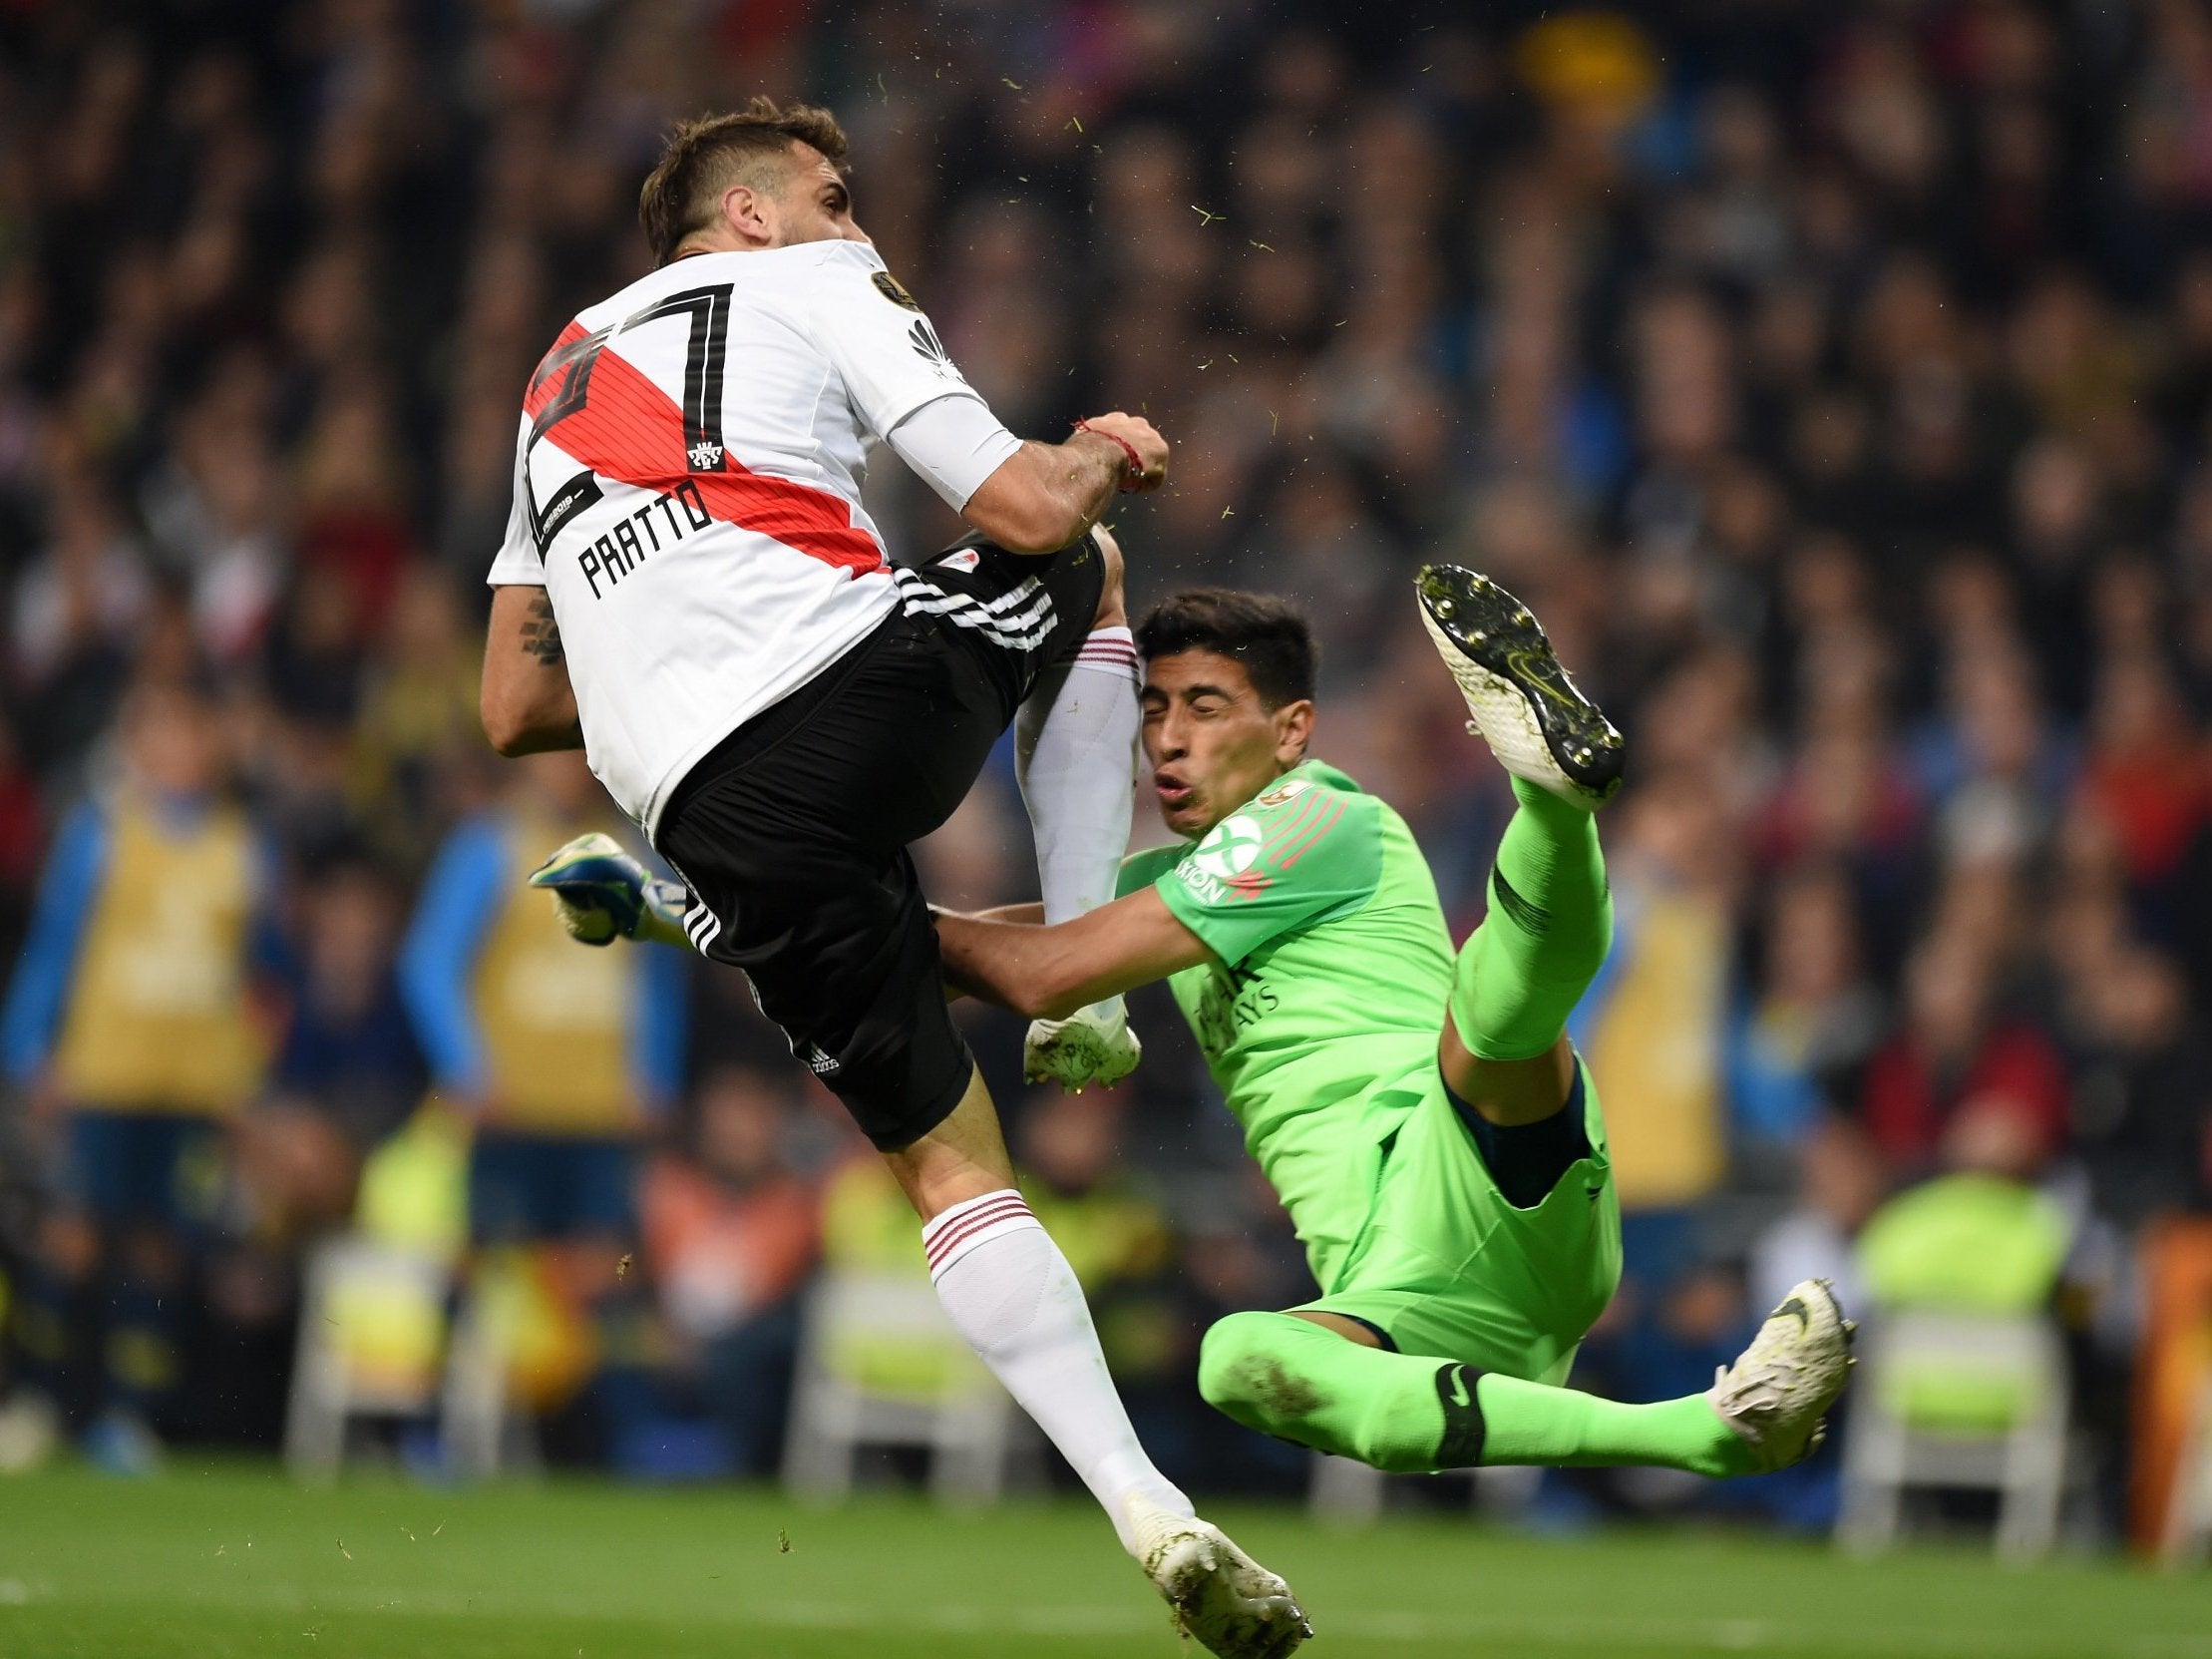 Copa Libertadores final dates confirmed for mouthwatering River Plate vs  Boca Juniors clash that will see fierce Argentinian rivals go head-to-head